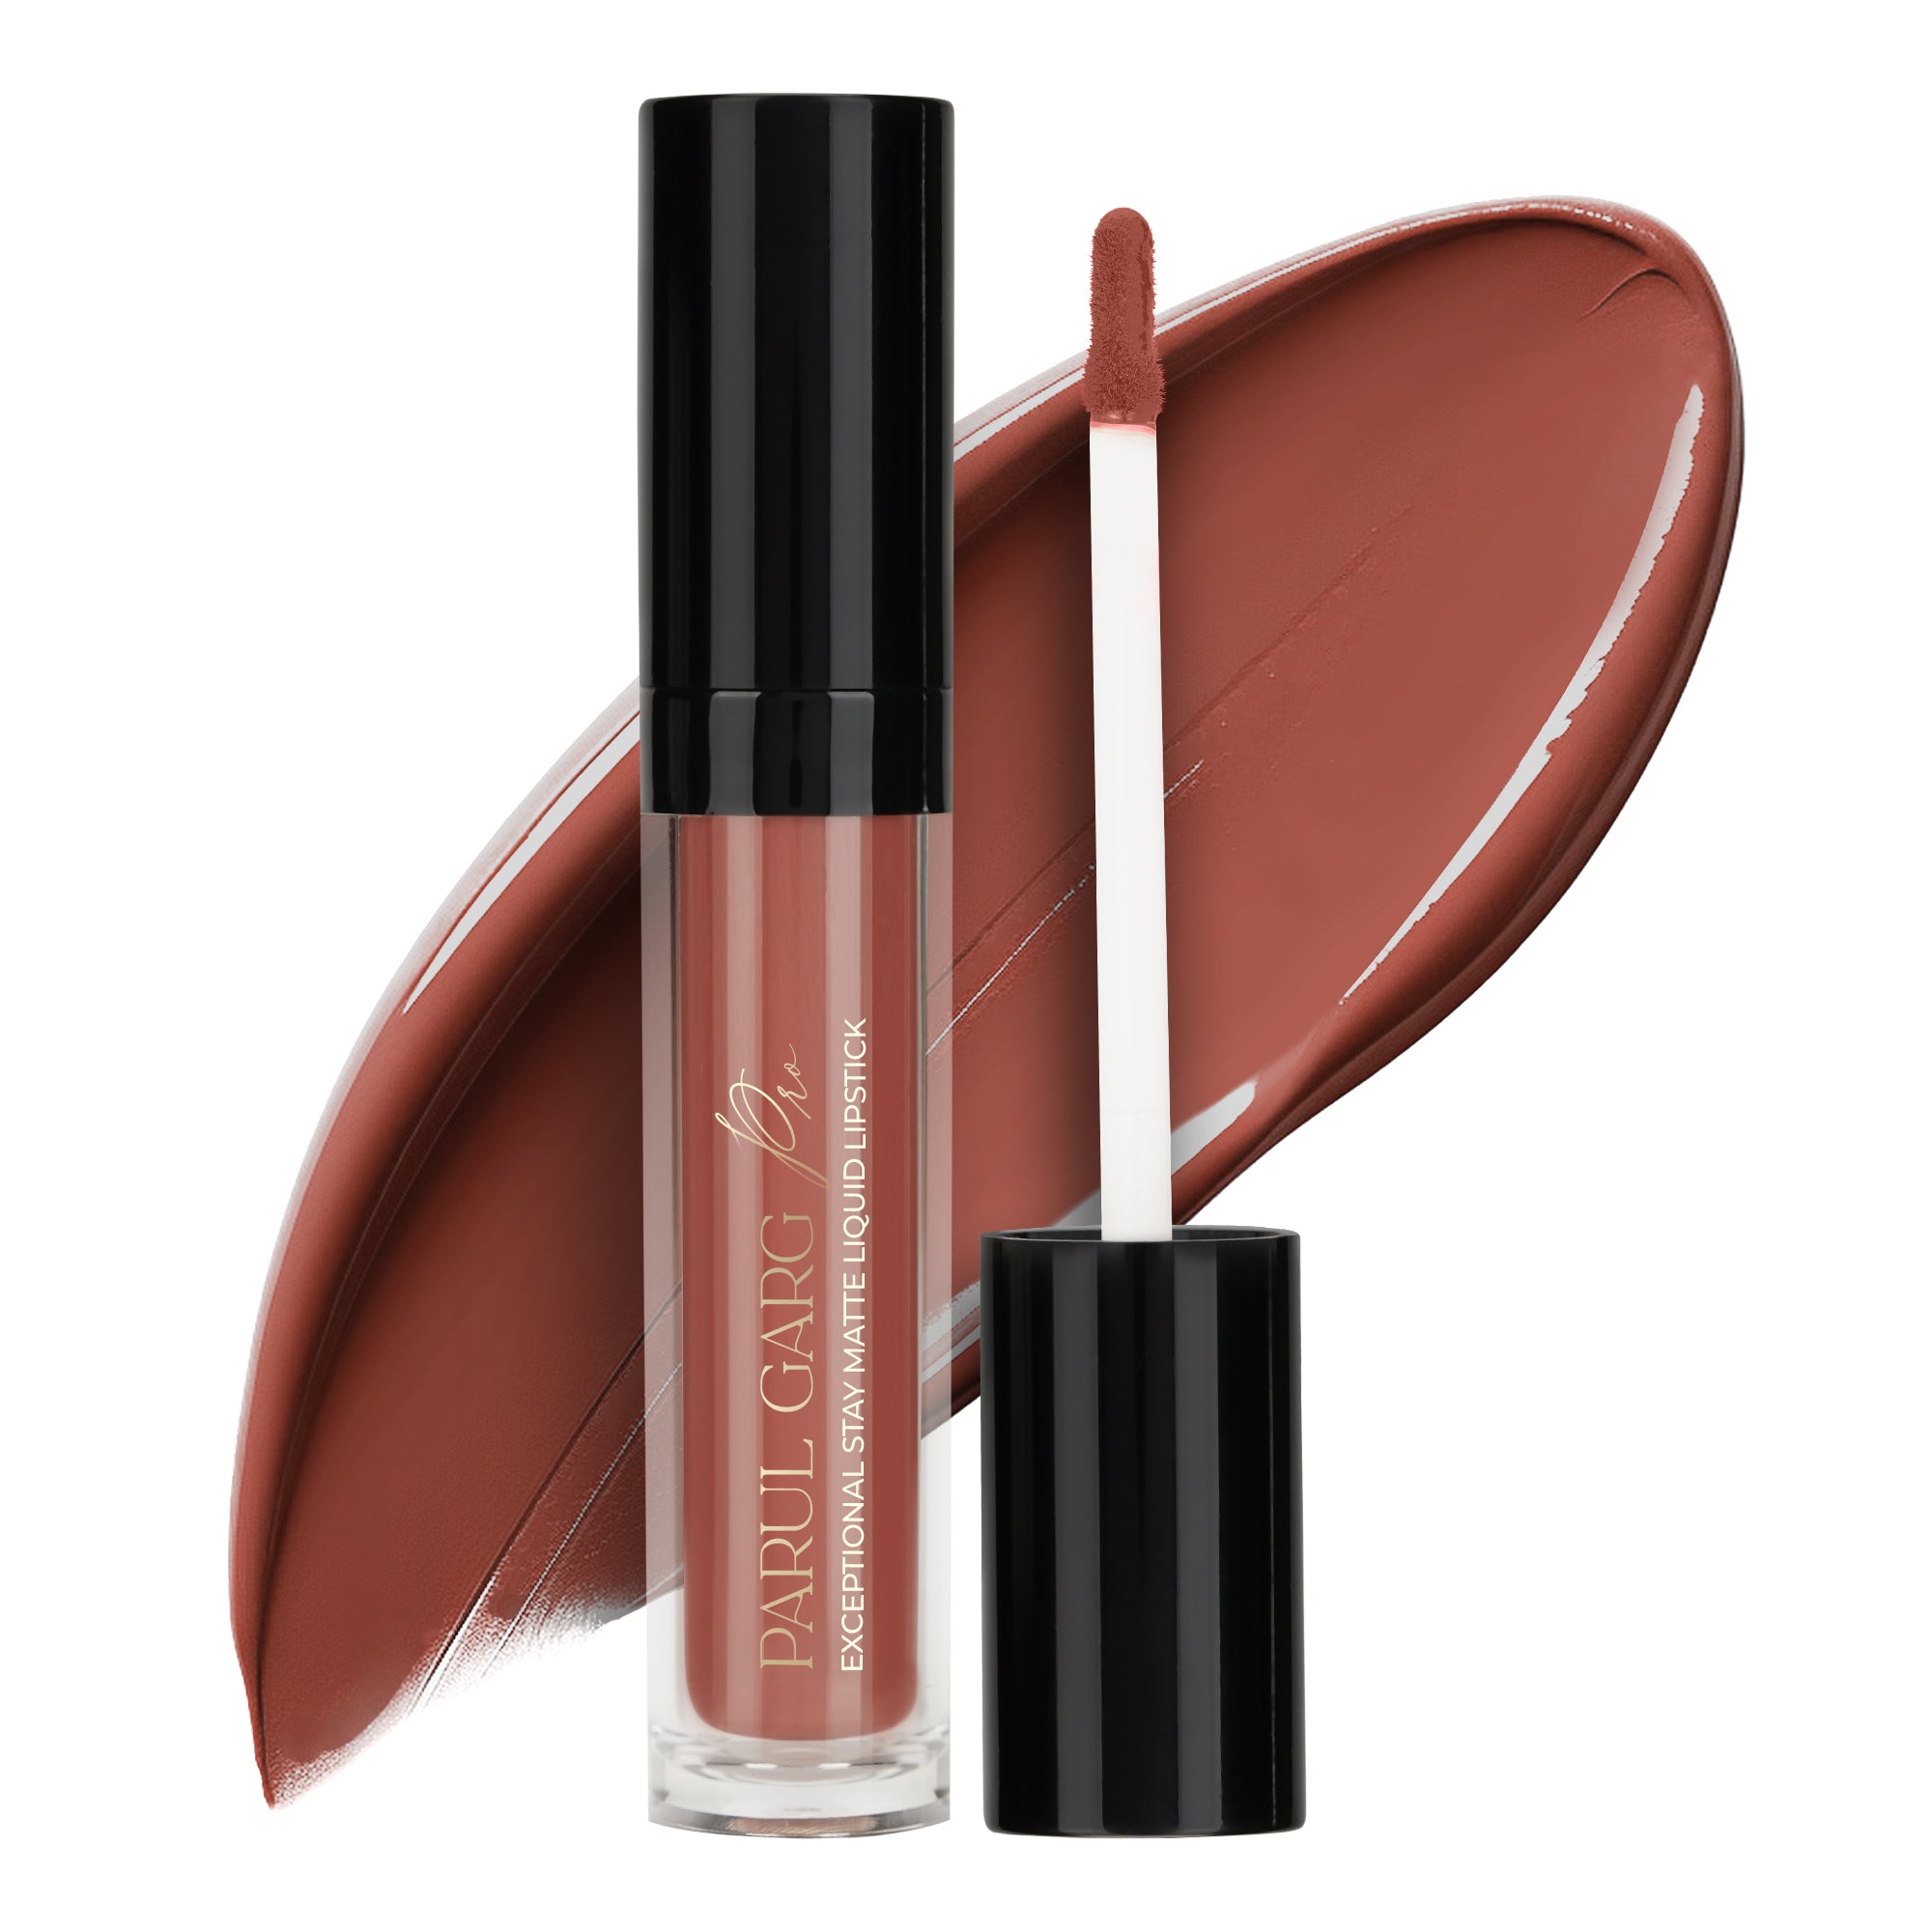 Exceptional Stay Matte Liquid Lipstick Shade: Fire Lily 02